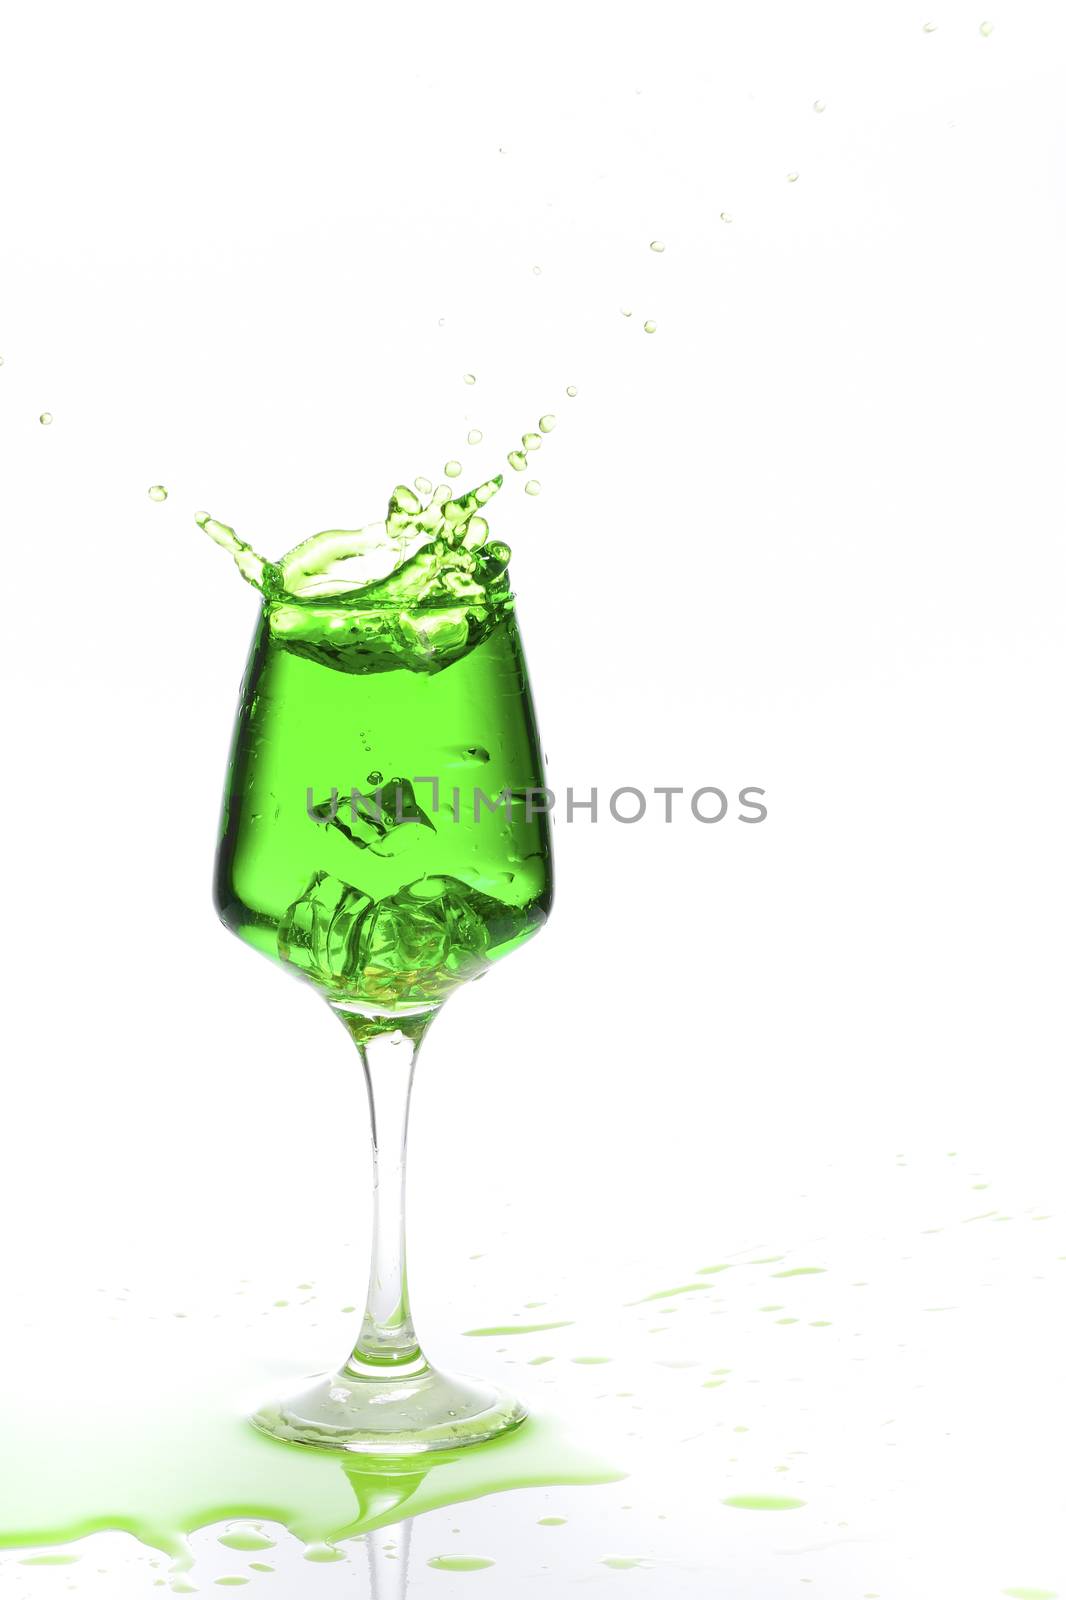 Stemmed champagne glass with liquor splashing out, isolated on white background